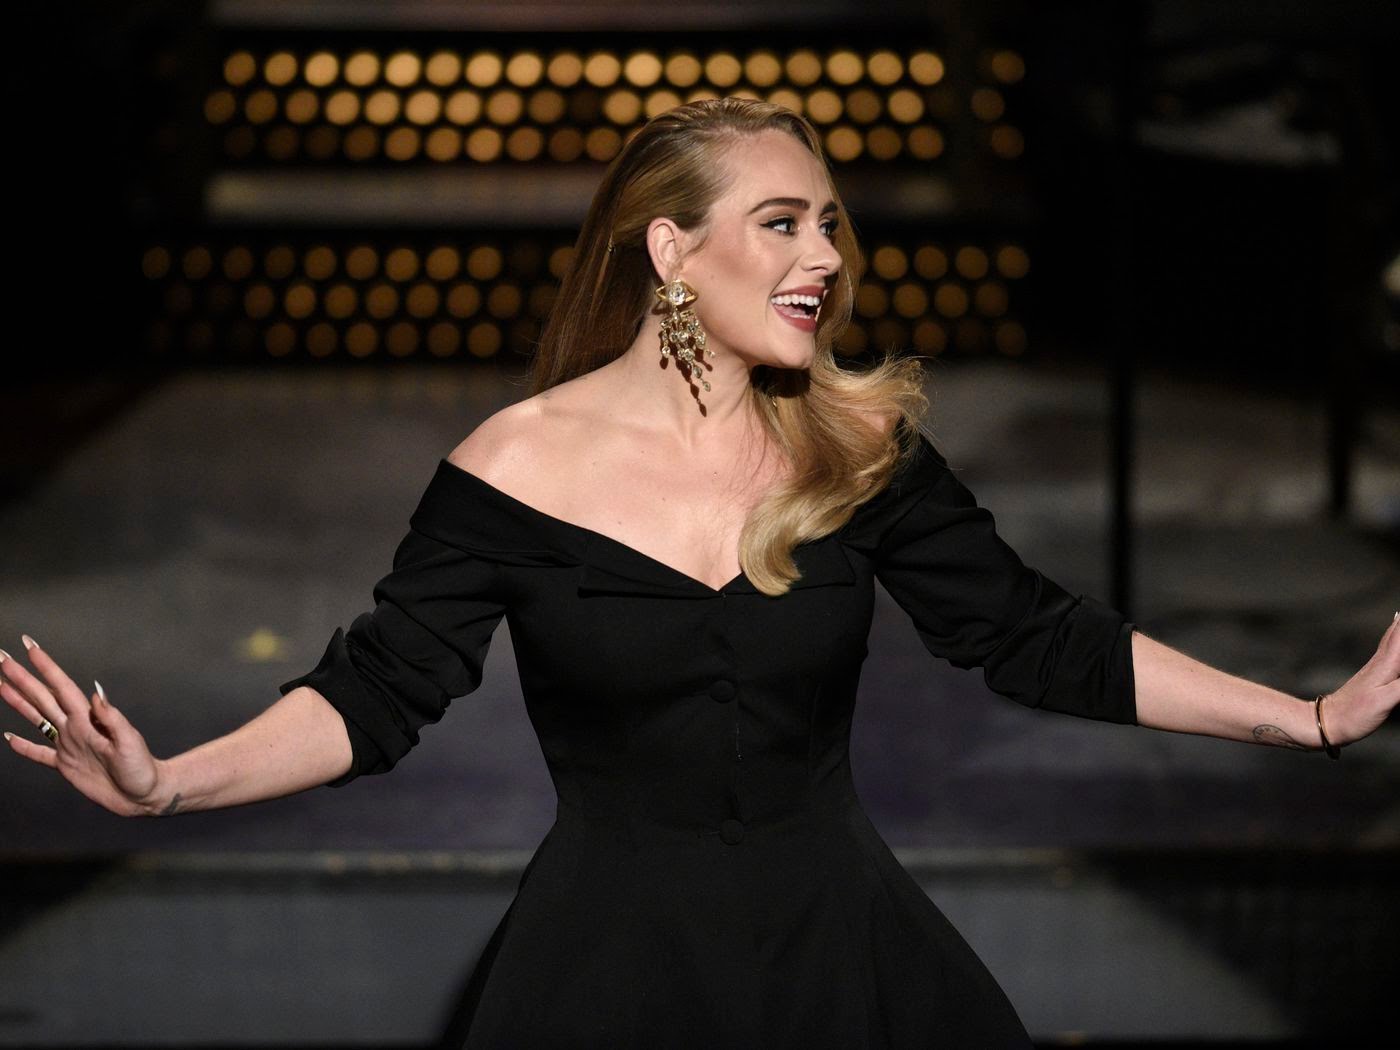 Adele has announced new show dates for her Las Vegas residency after a last-minute postponing of the original performances. Her residency is now set to begin in November.